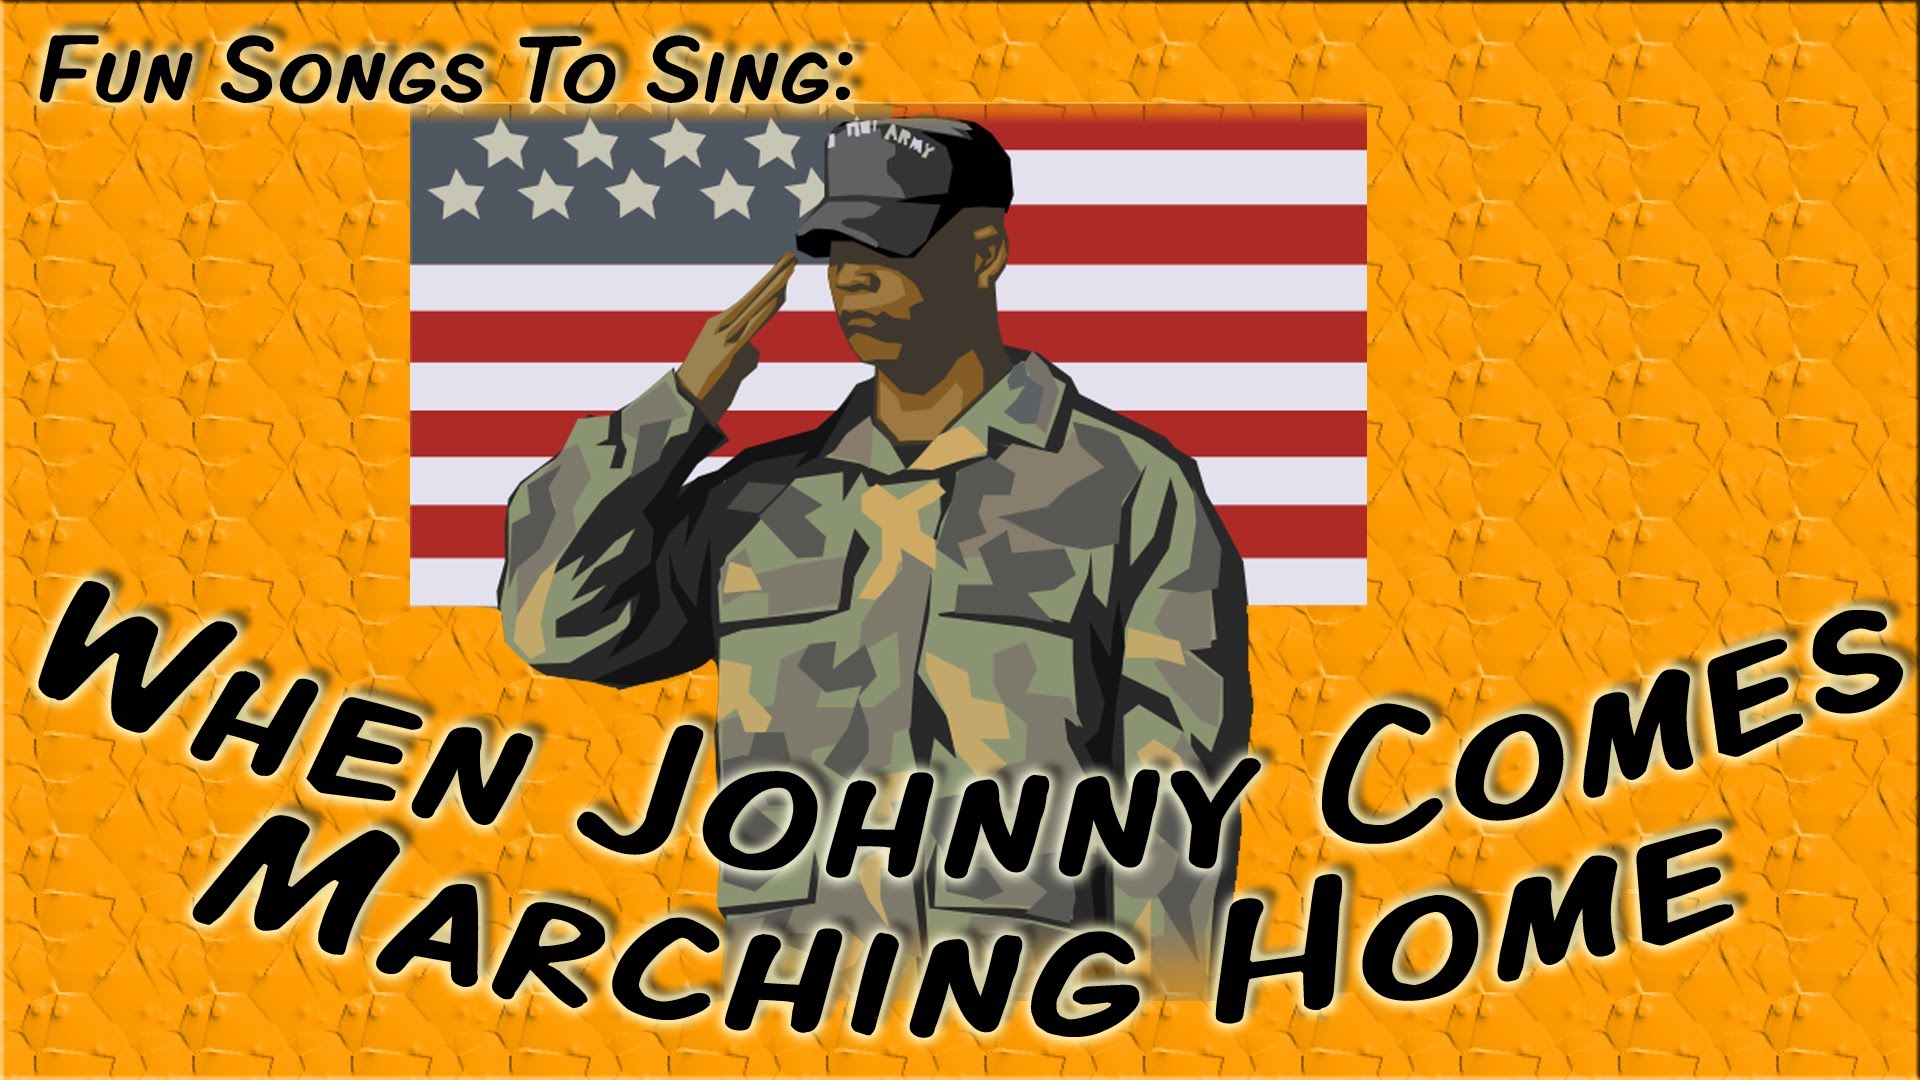 When Johnny comes marching home lyrics (1863) - written by Louis Lambert